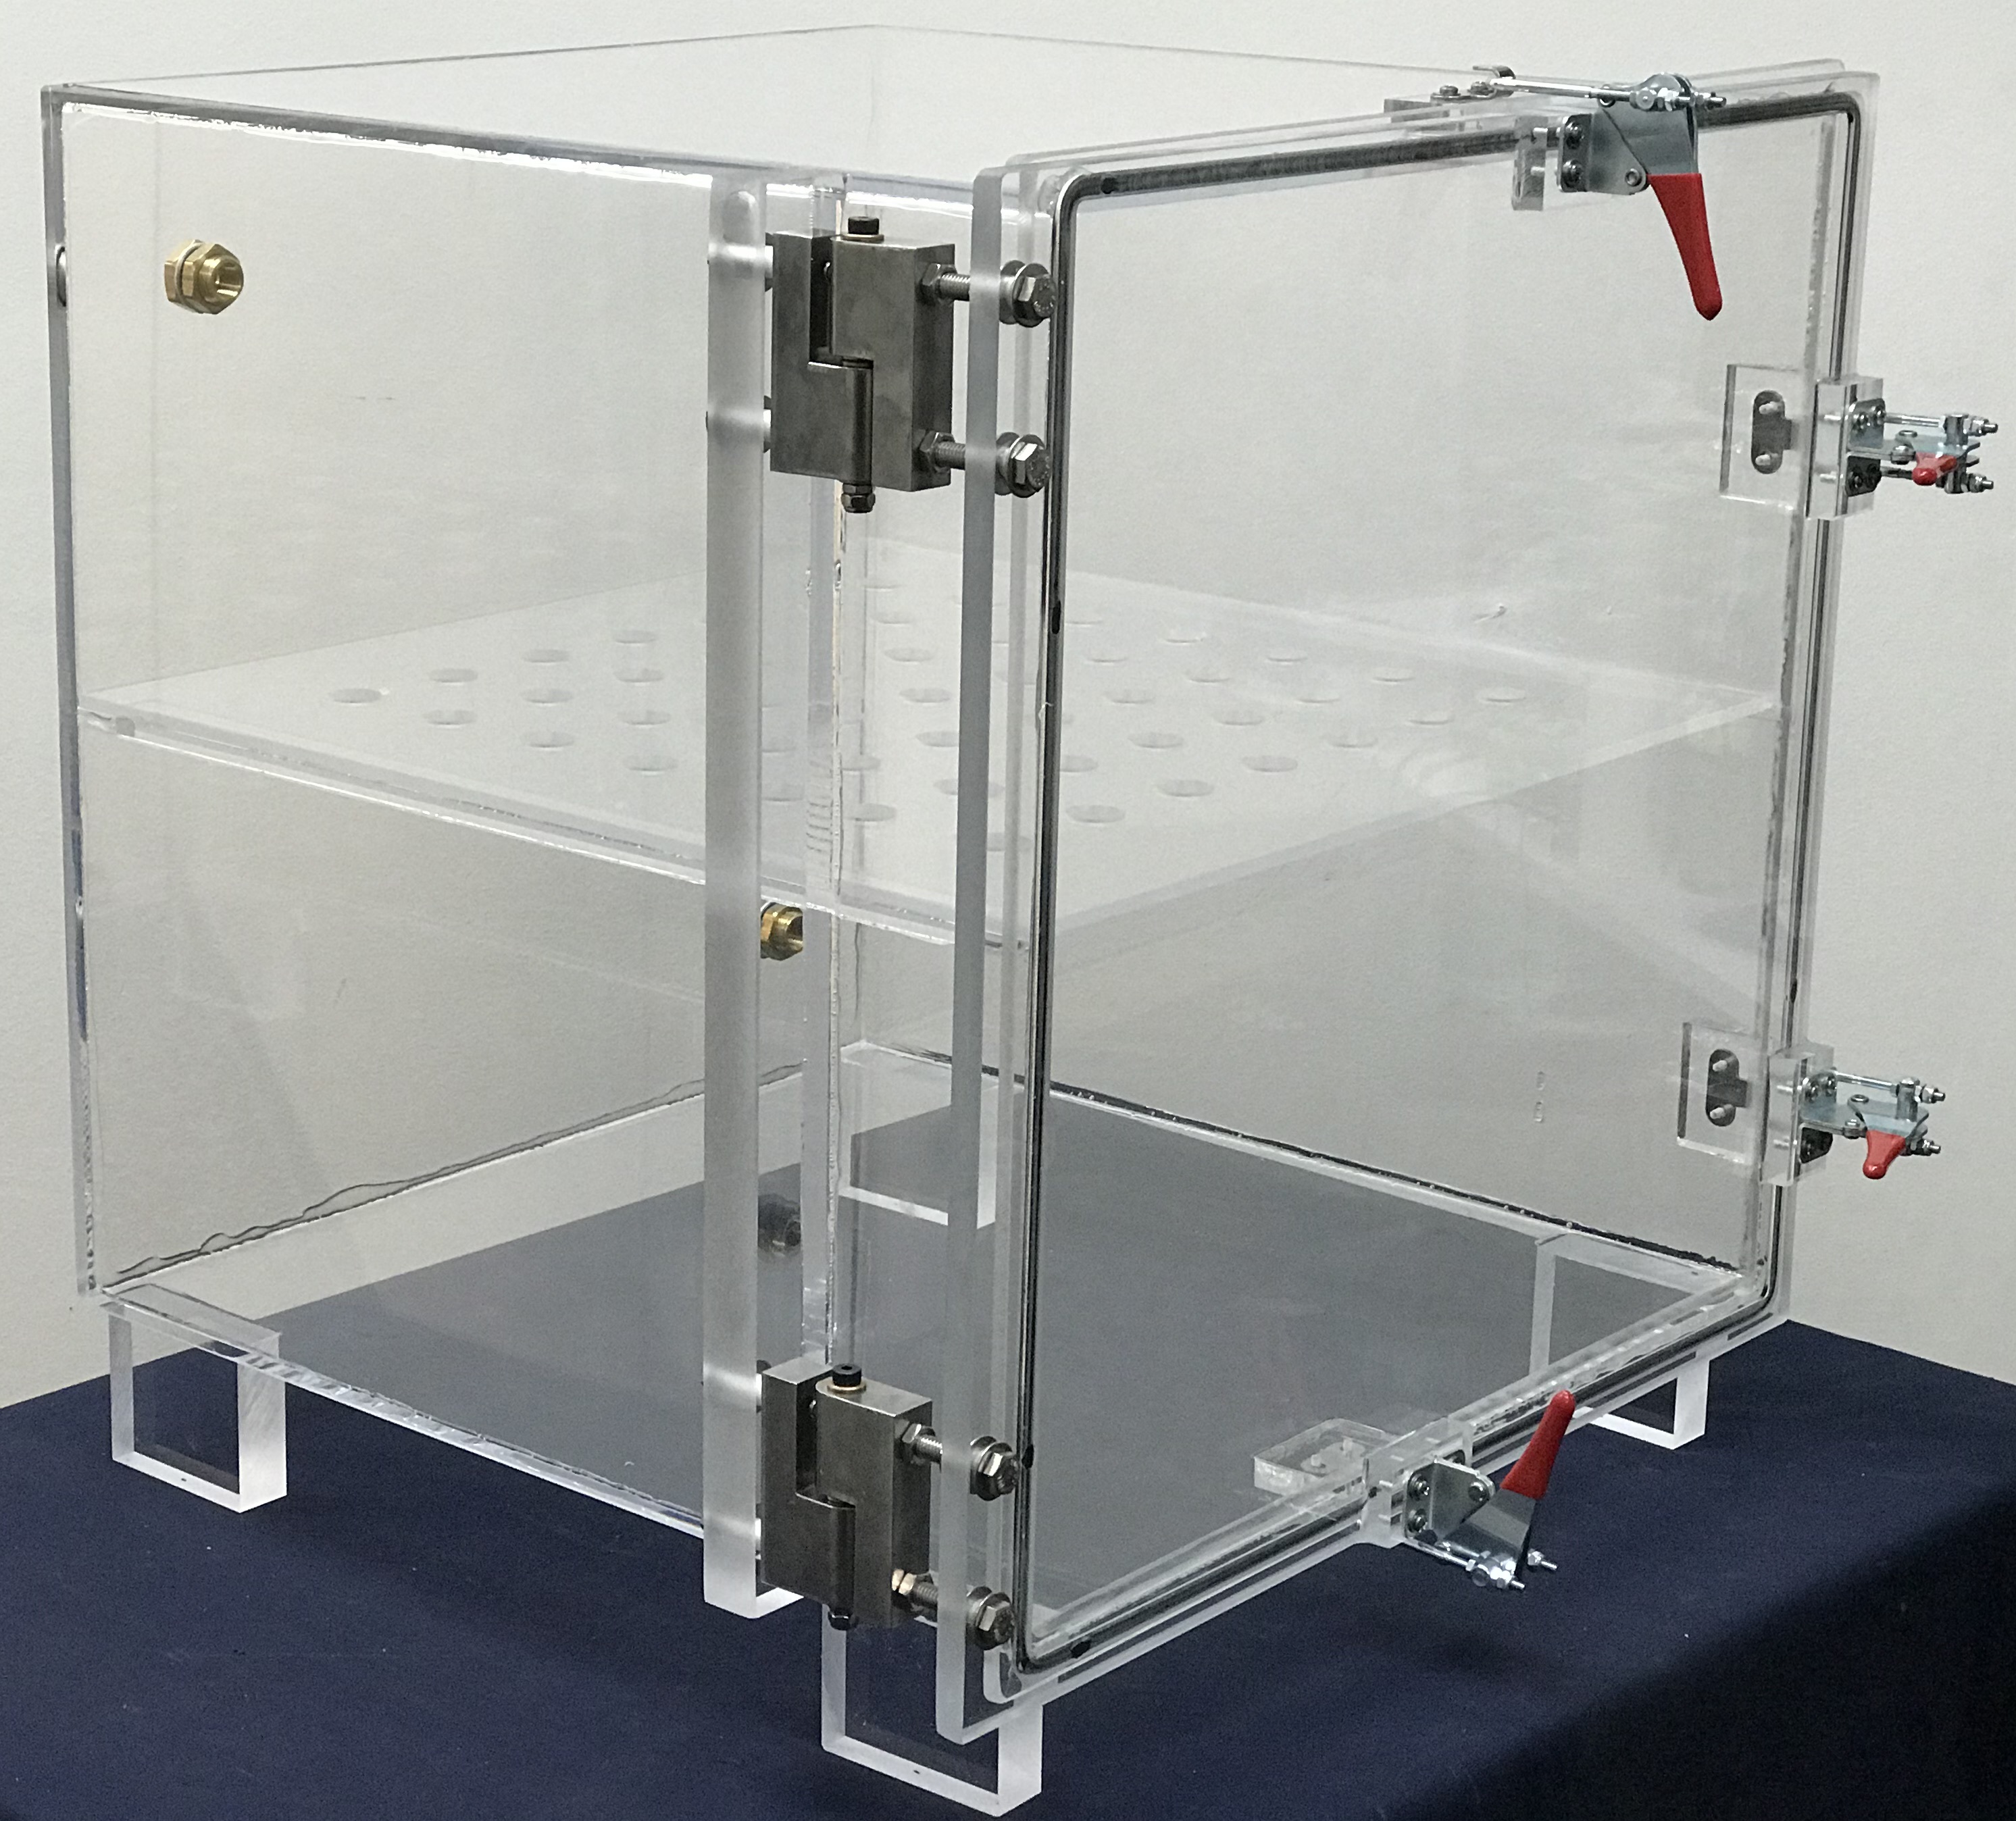 https://www.sanatron.com/products/images/desiccator-cabinet-clear-acrylic1-door-dry-box.jpg